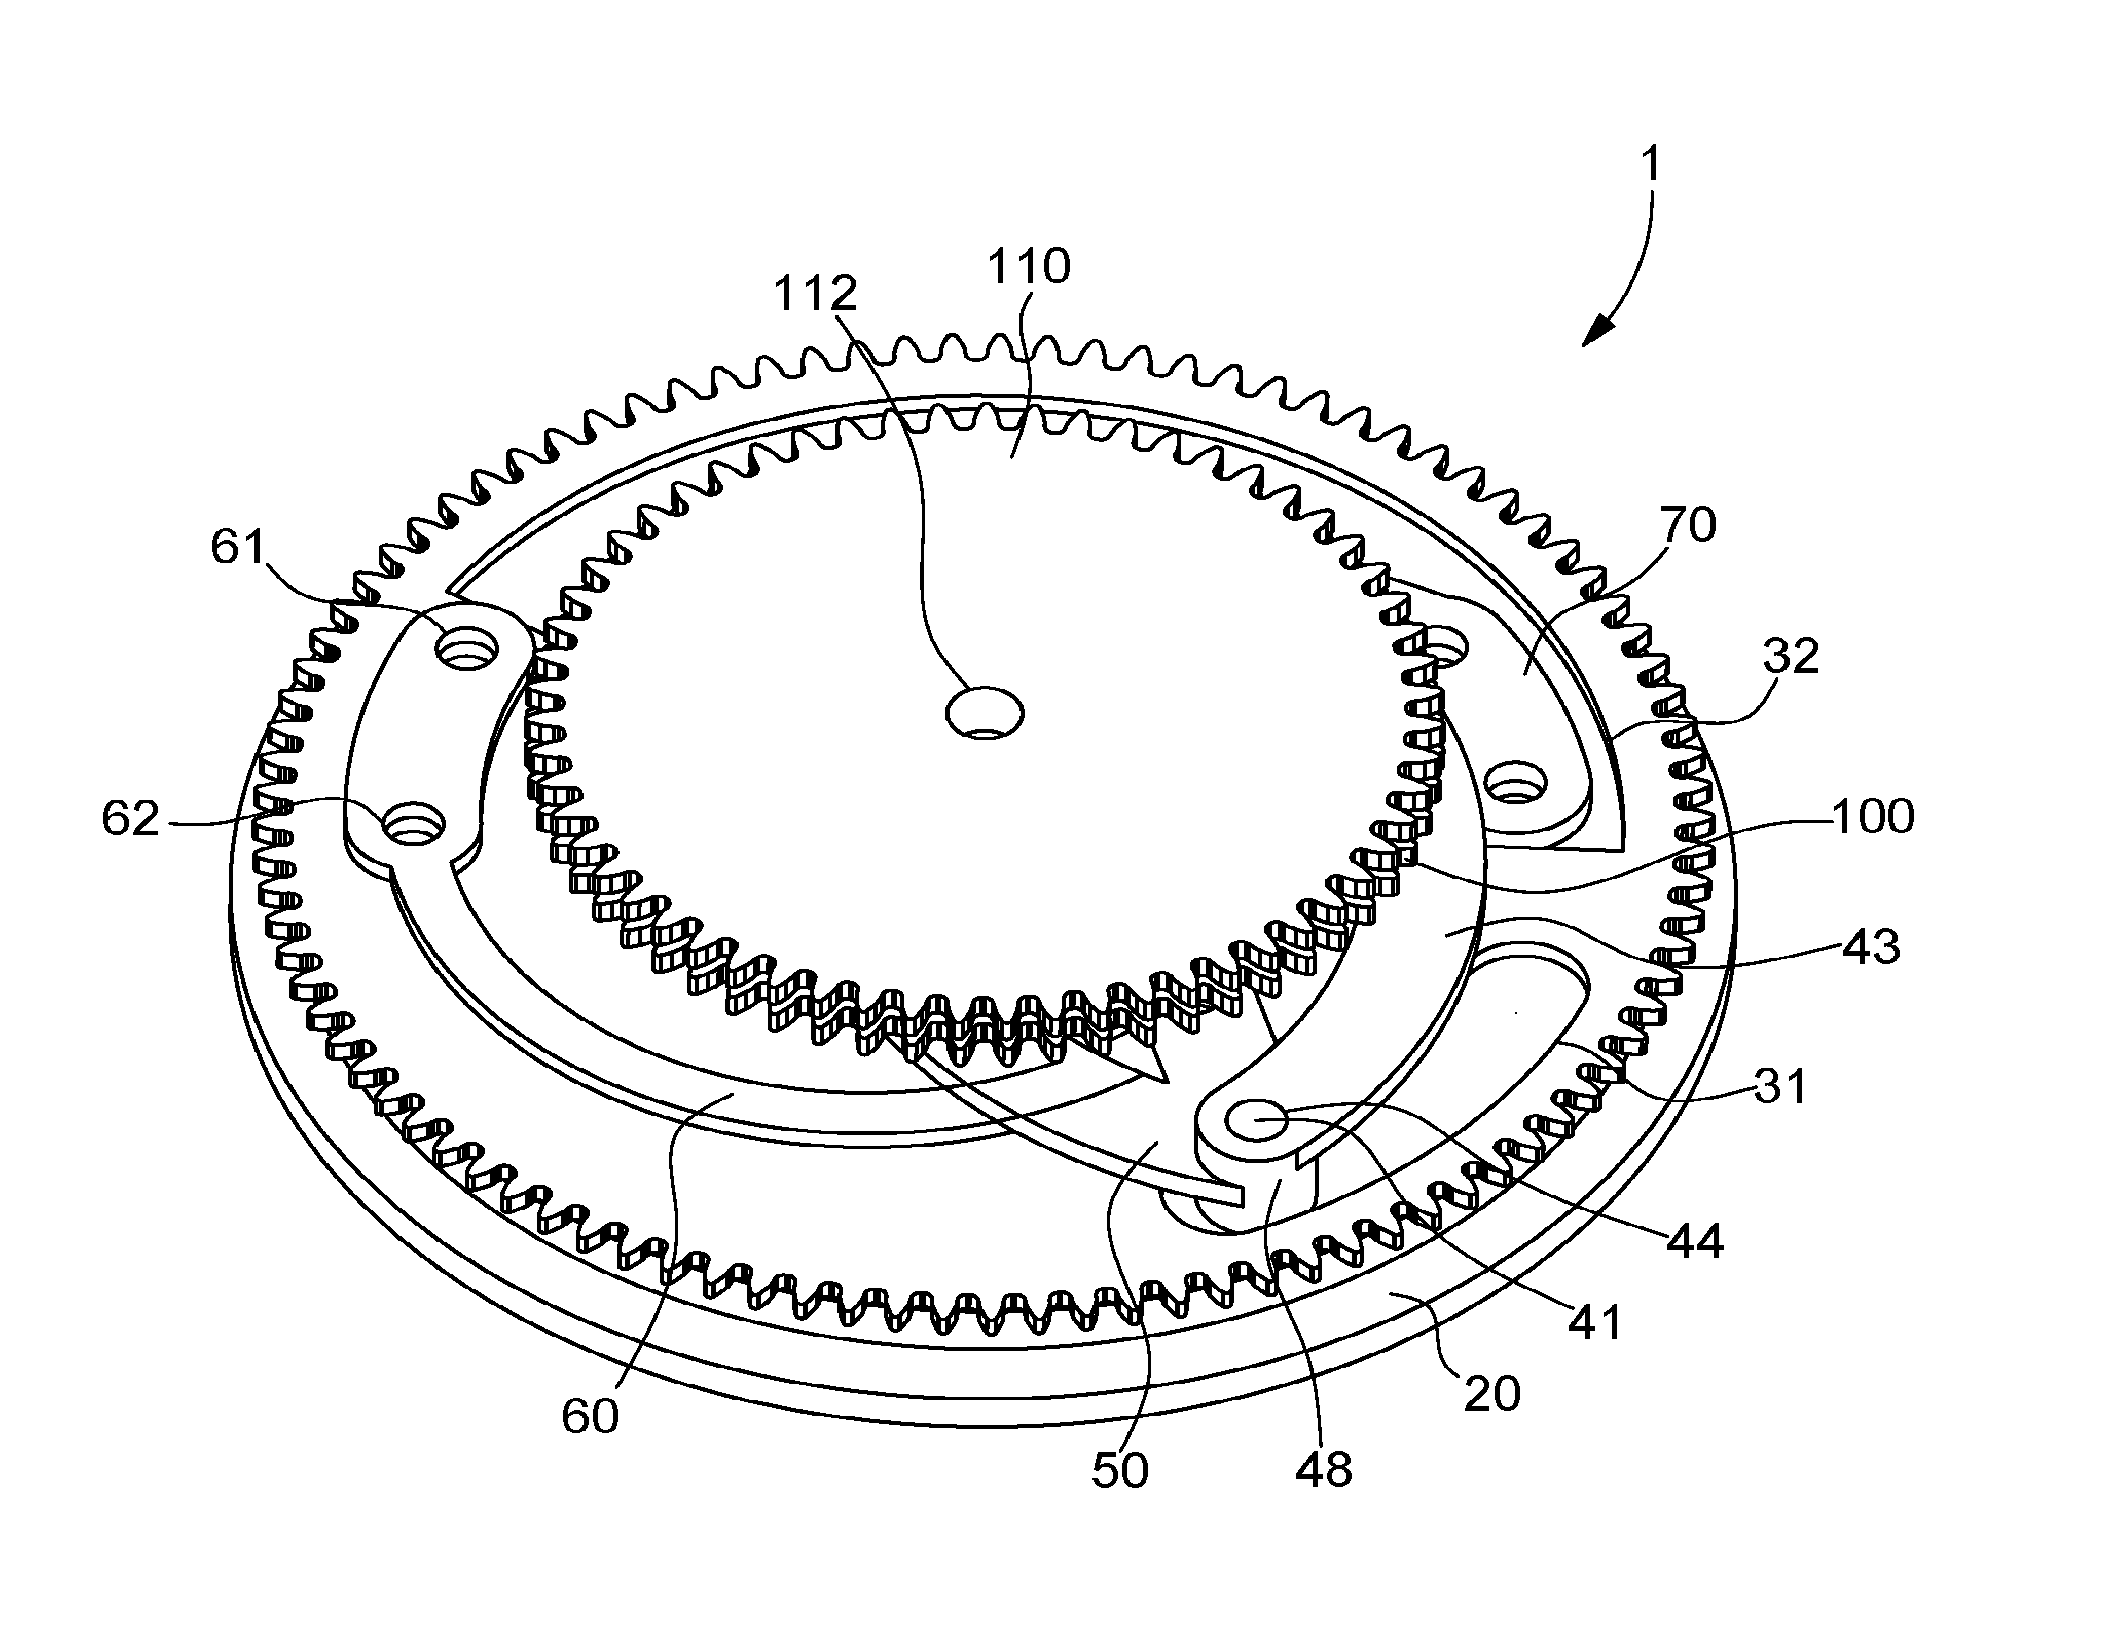 Moon phase display mechanism for timepieces